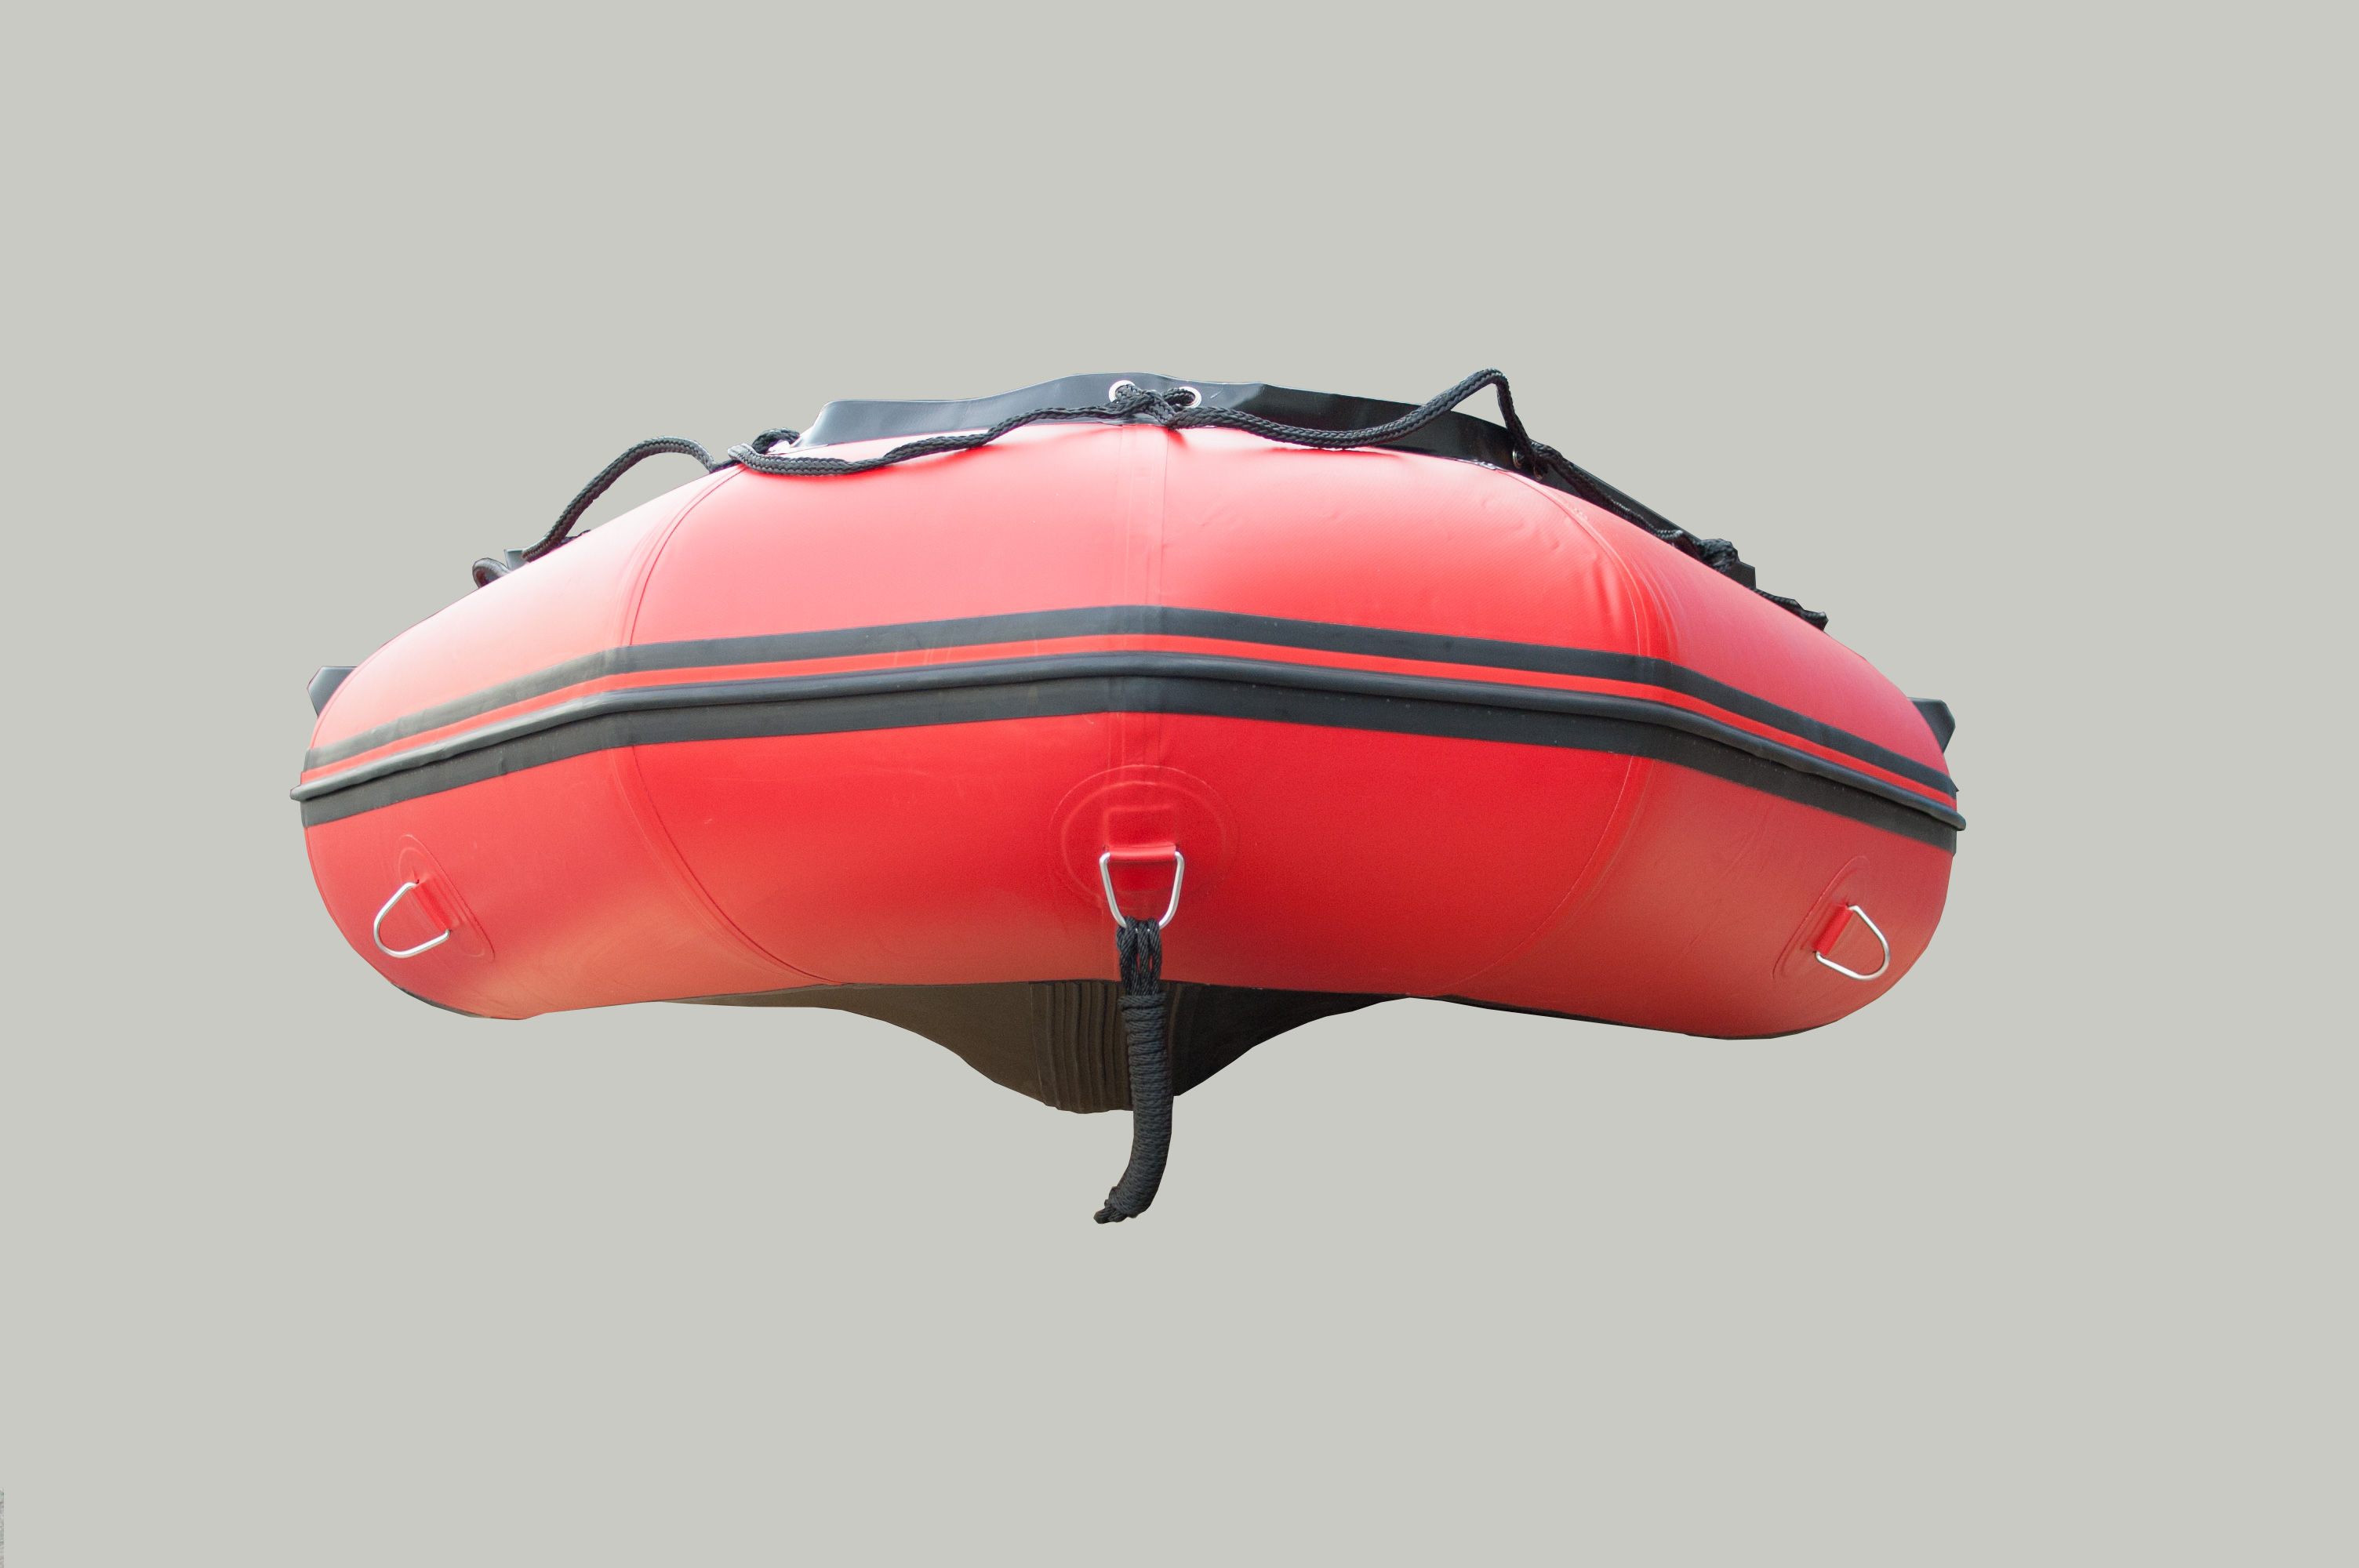 https://www.aquamarineboat.com/images/products/12ft_boat_alum/12_5ft_inflatable_boat_fishing_sport05hd.jpg